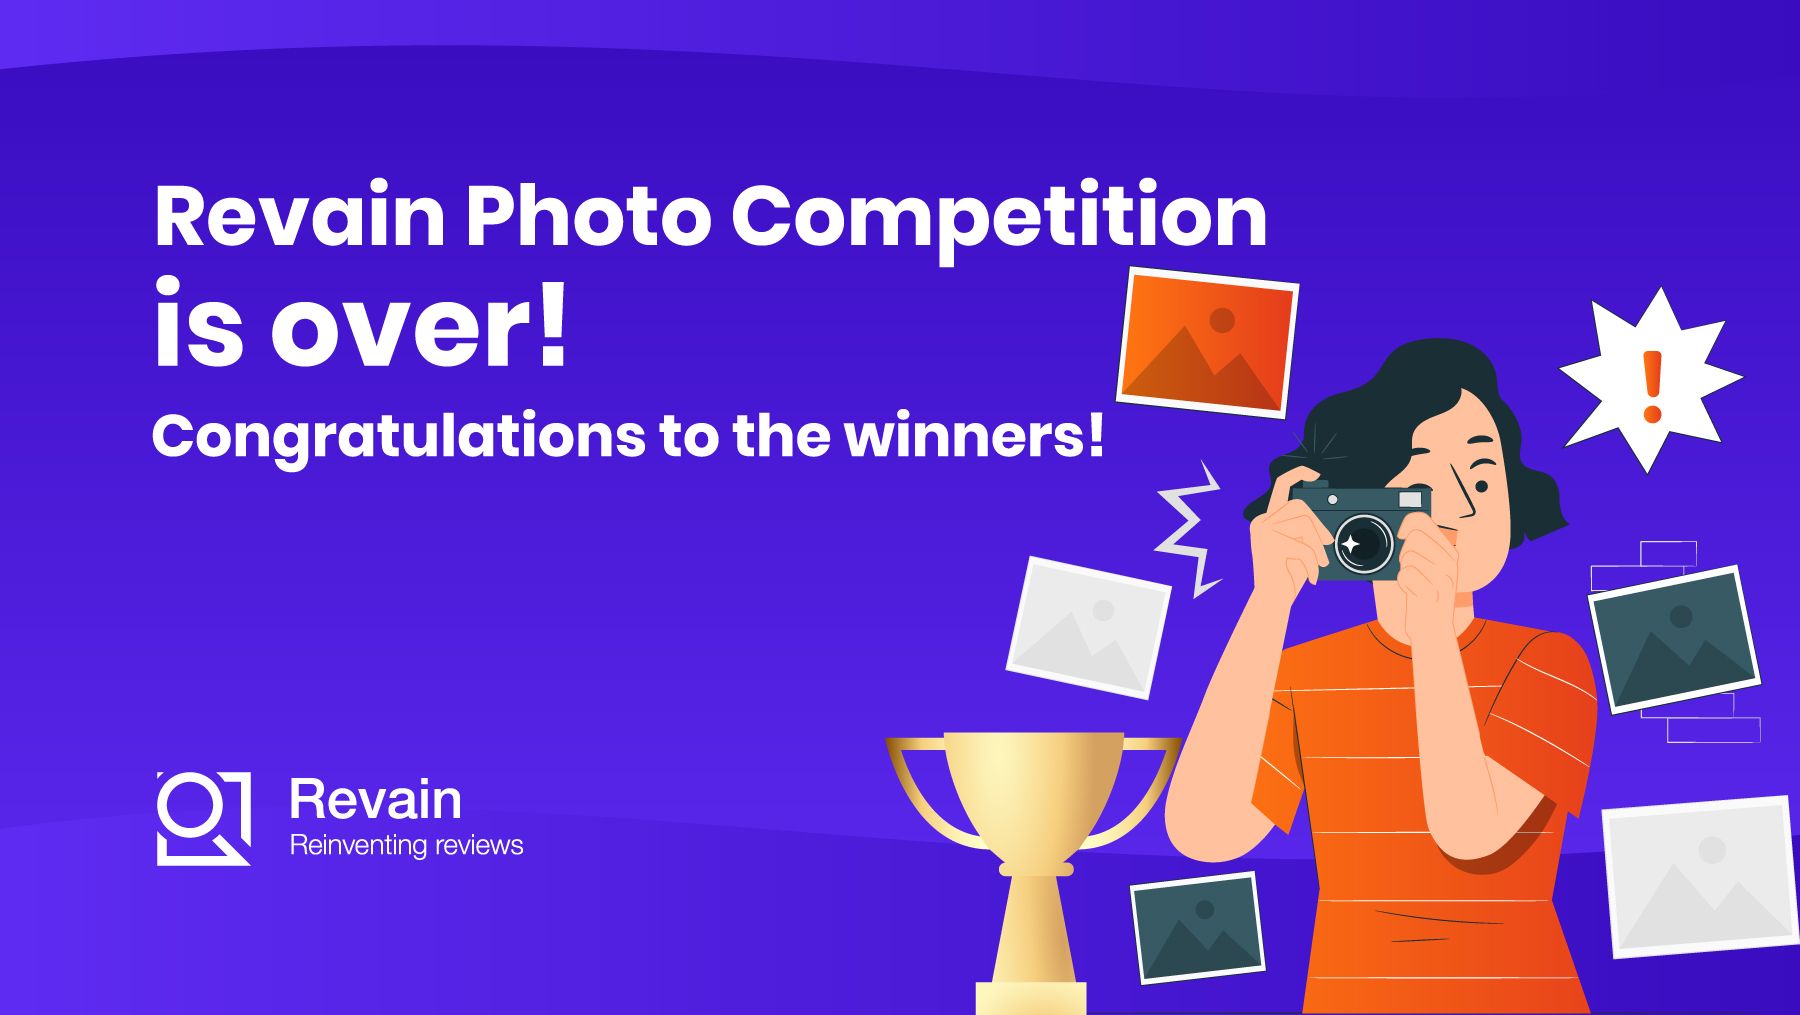 Article Winners of the Photo Competition